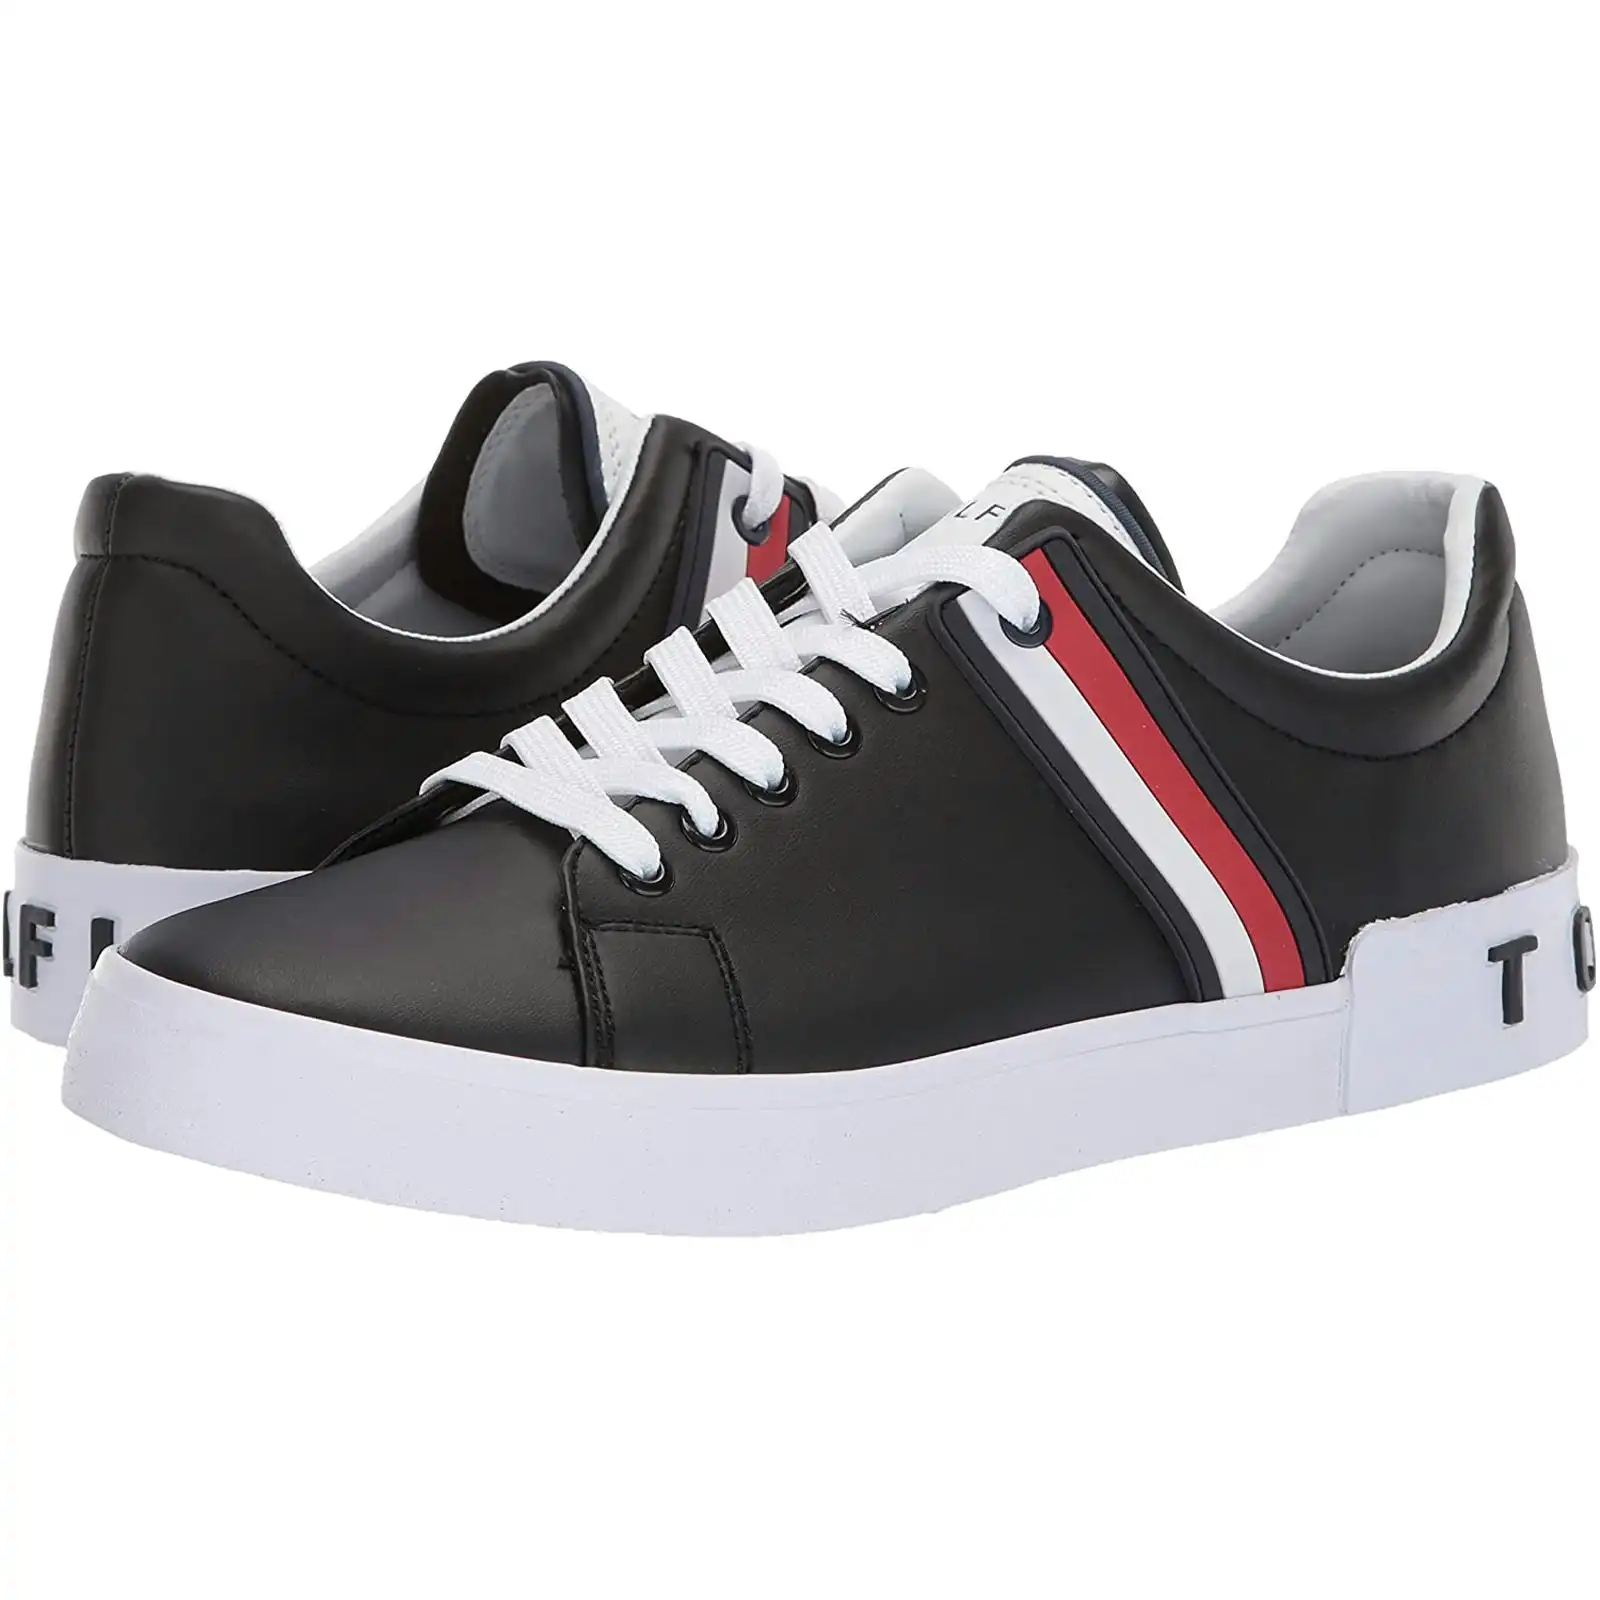 Tommy Hilfiger Shoes Sneakers Ramus Mens Casual Round Toe Brand New